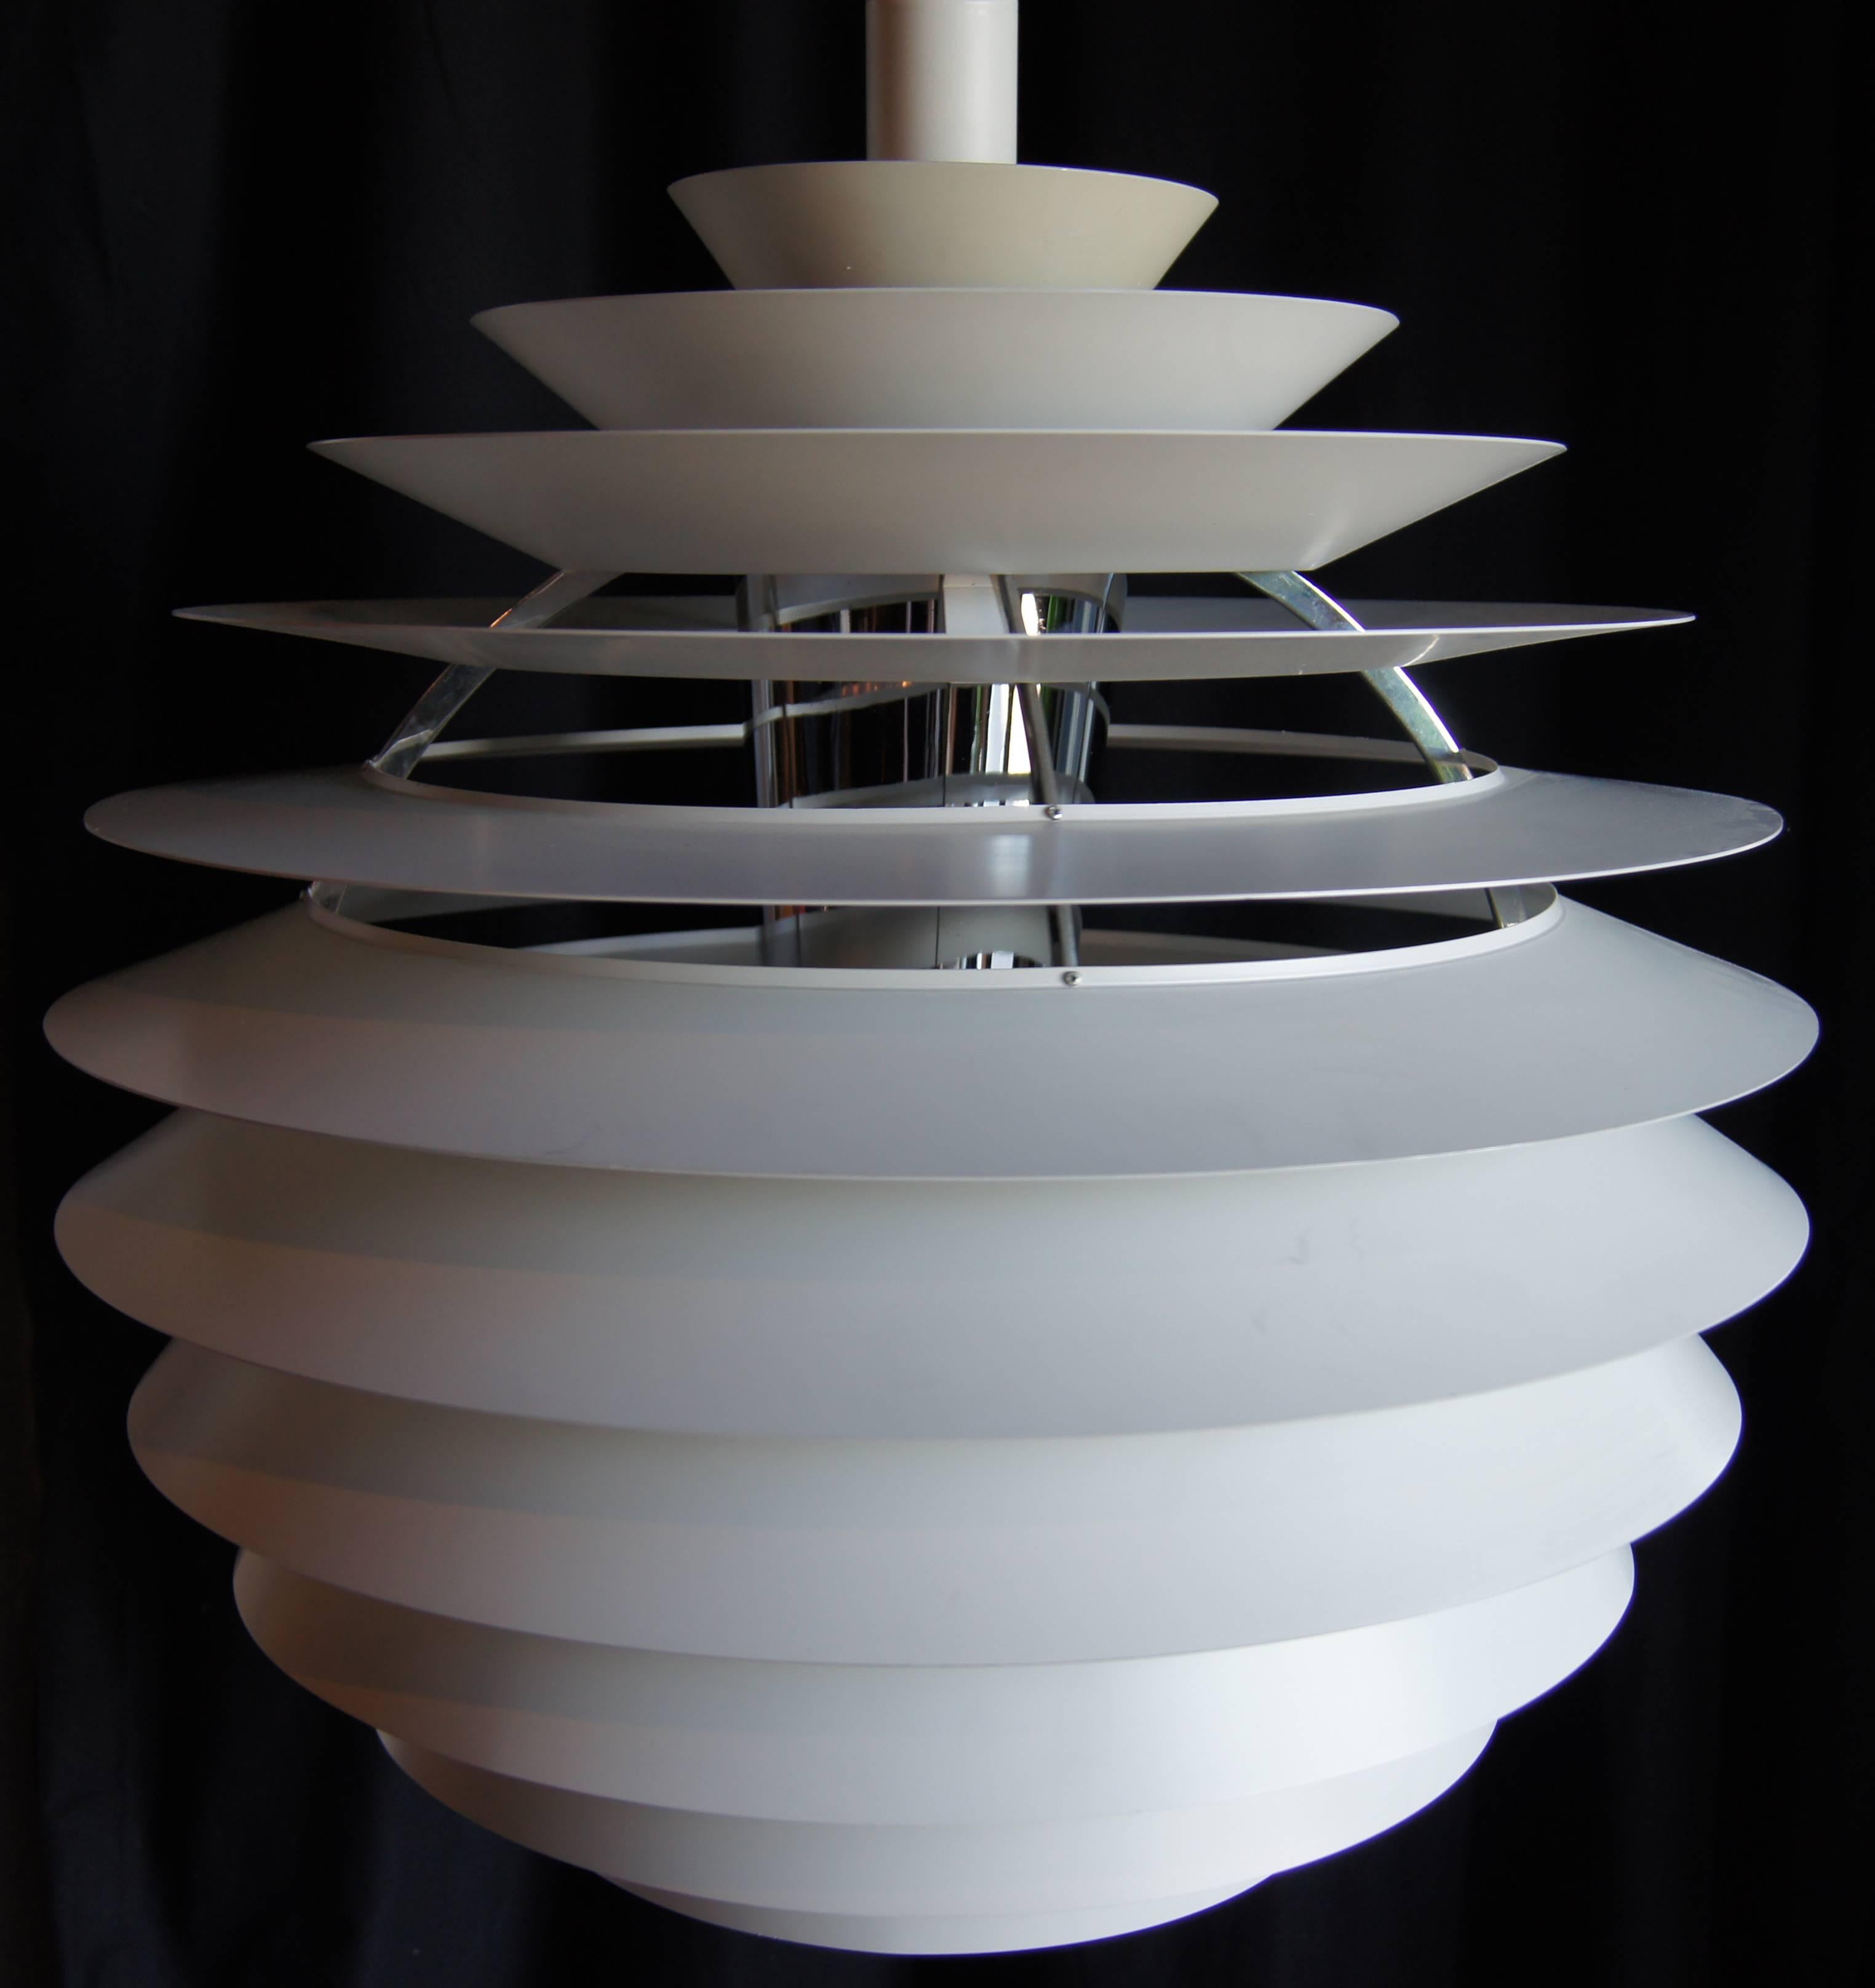 Poul Henningsen designed this pendant lamp for Louis Poulsen in 1957. The white lacquered metal tiers form an elongated globe that emits an even light.

Note that this fixture has a European socket; bulb and canopy not included.